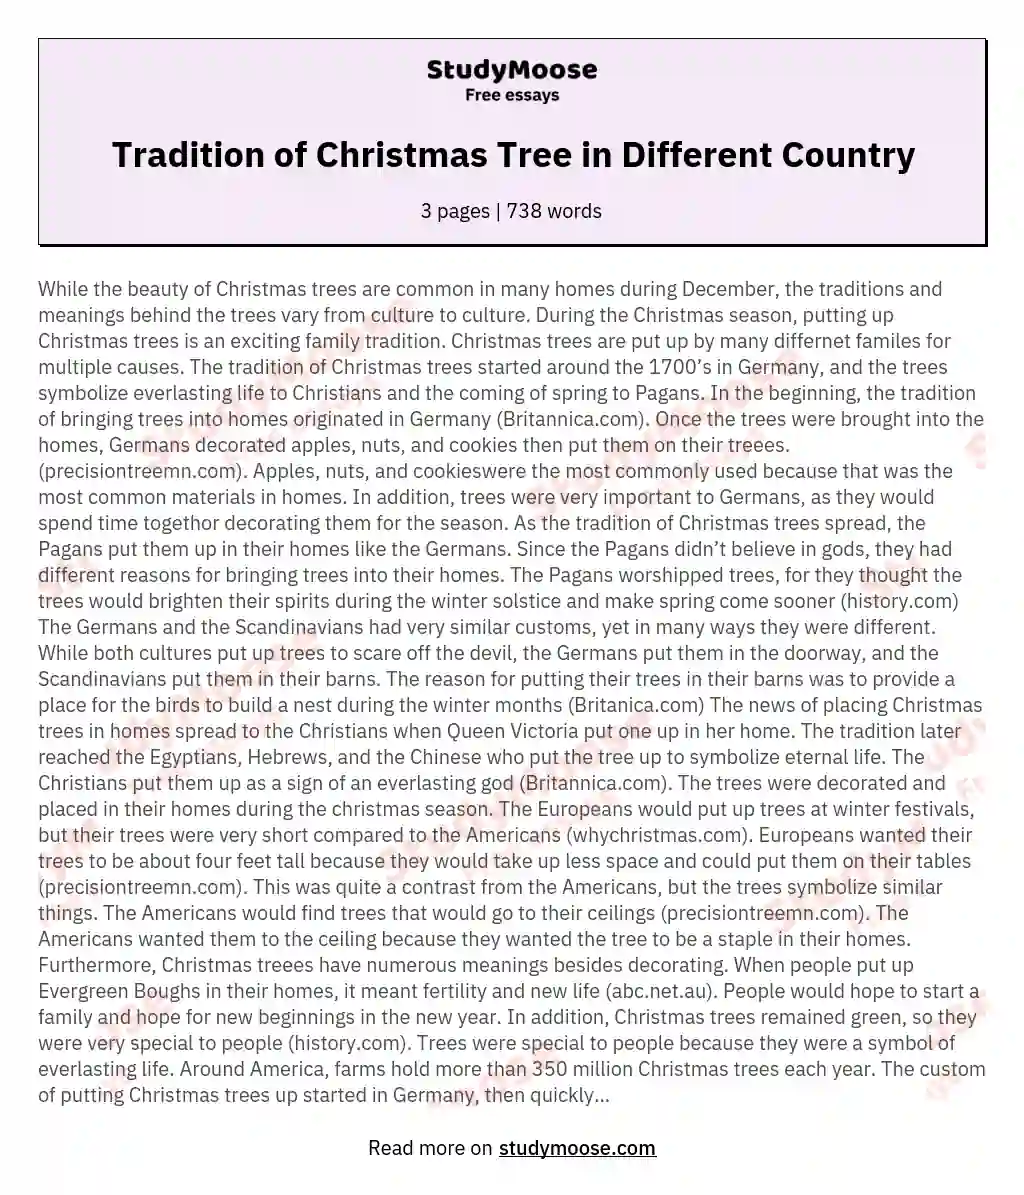 Tradition of Christmas Tree in Different Country essay